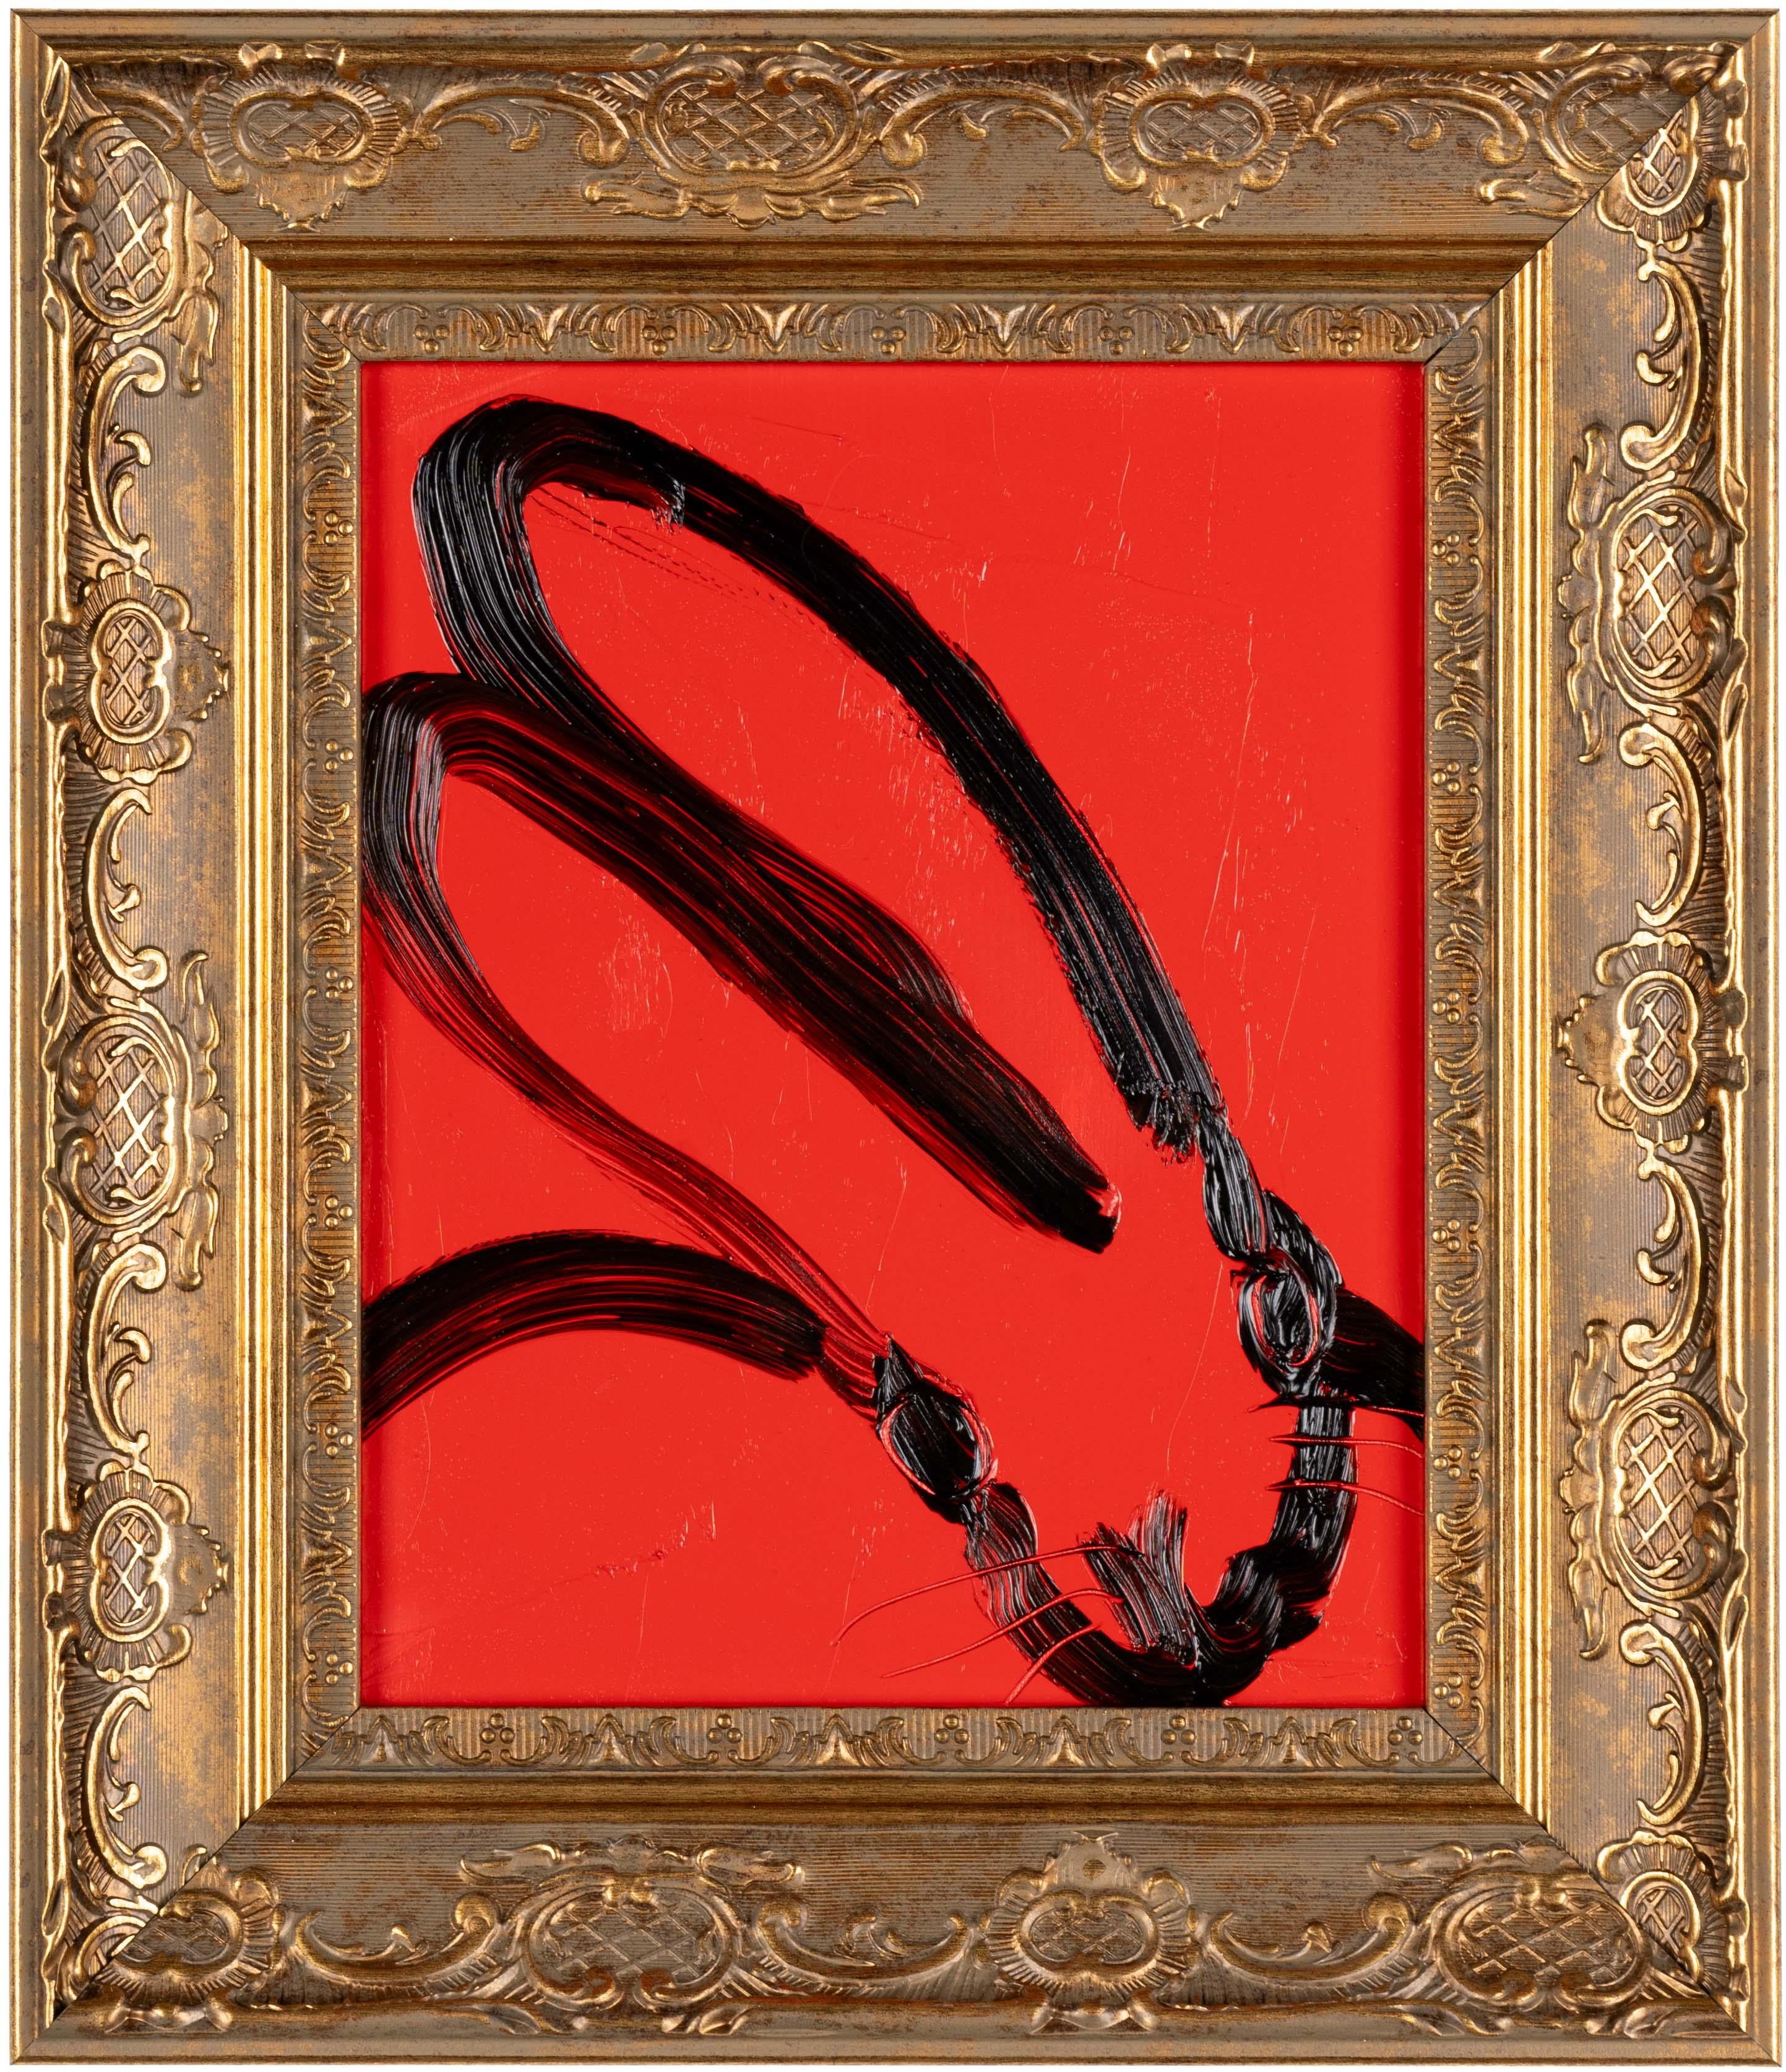 Hunt Slonem "Red Rouse" Bunny
A bunny gestured in black on a red background. Framed in an antique wooden gold frame.

Unframed: 10 x 8 inches
Framed: 14.5 x 12.5 inches
*Painting is framed - Please note Hunt Slonem paintings with frames may show